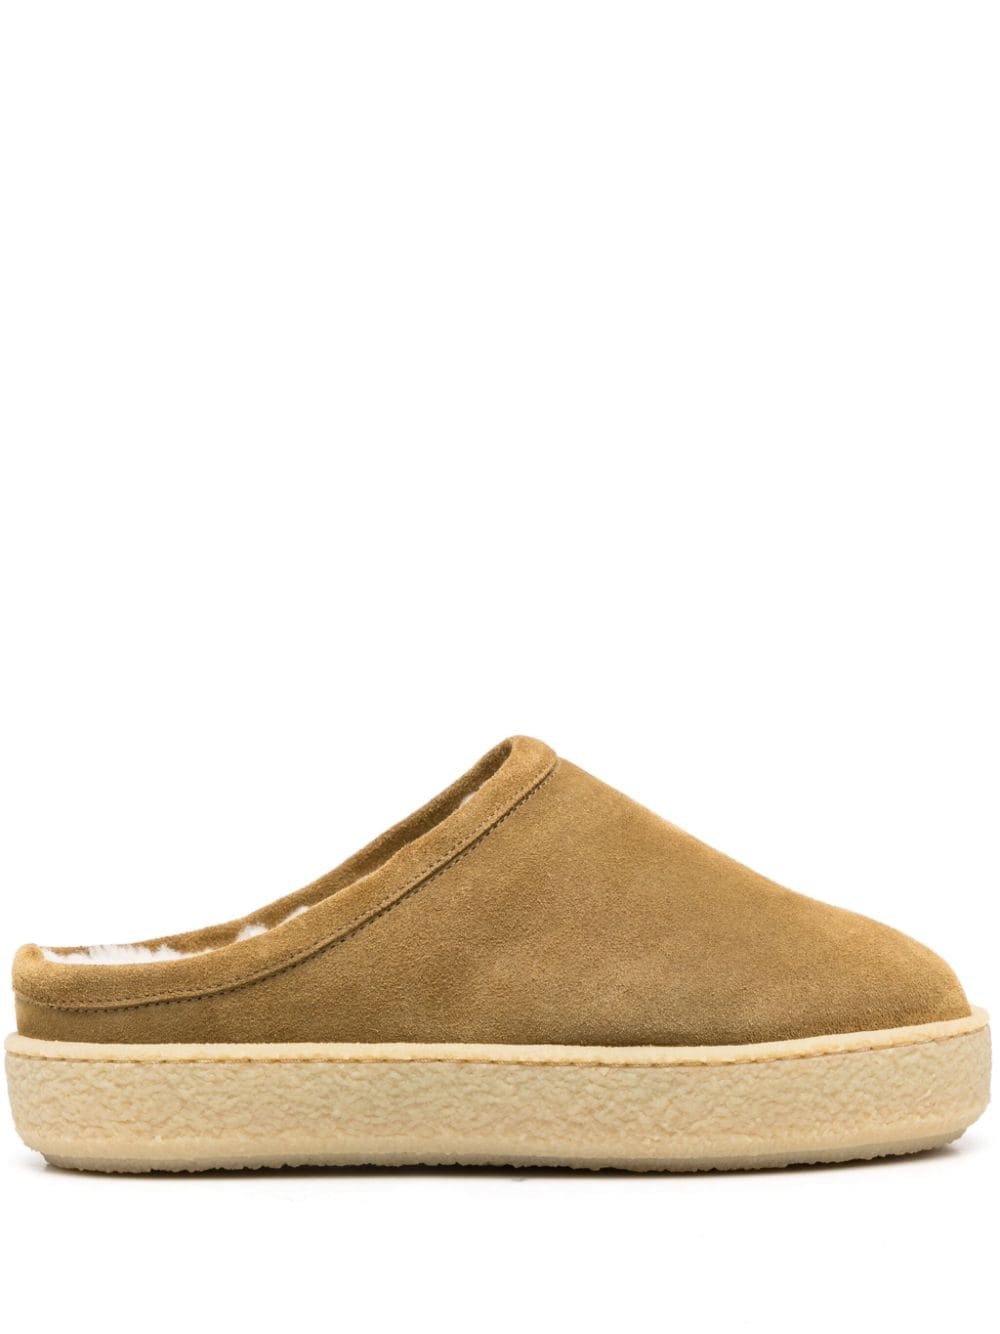 shearling suede mules - 1